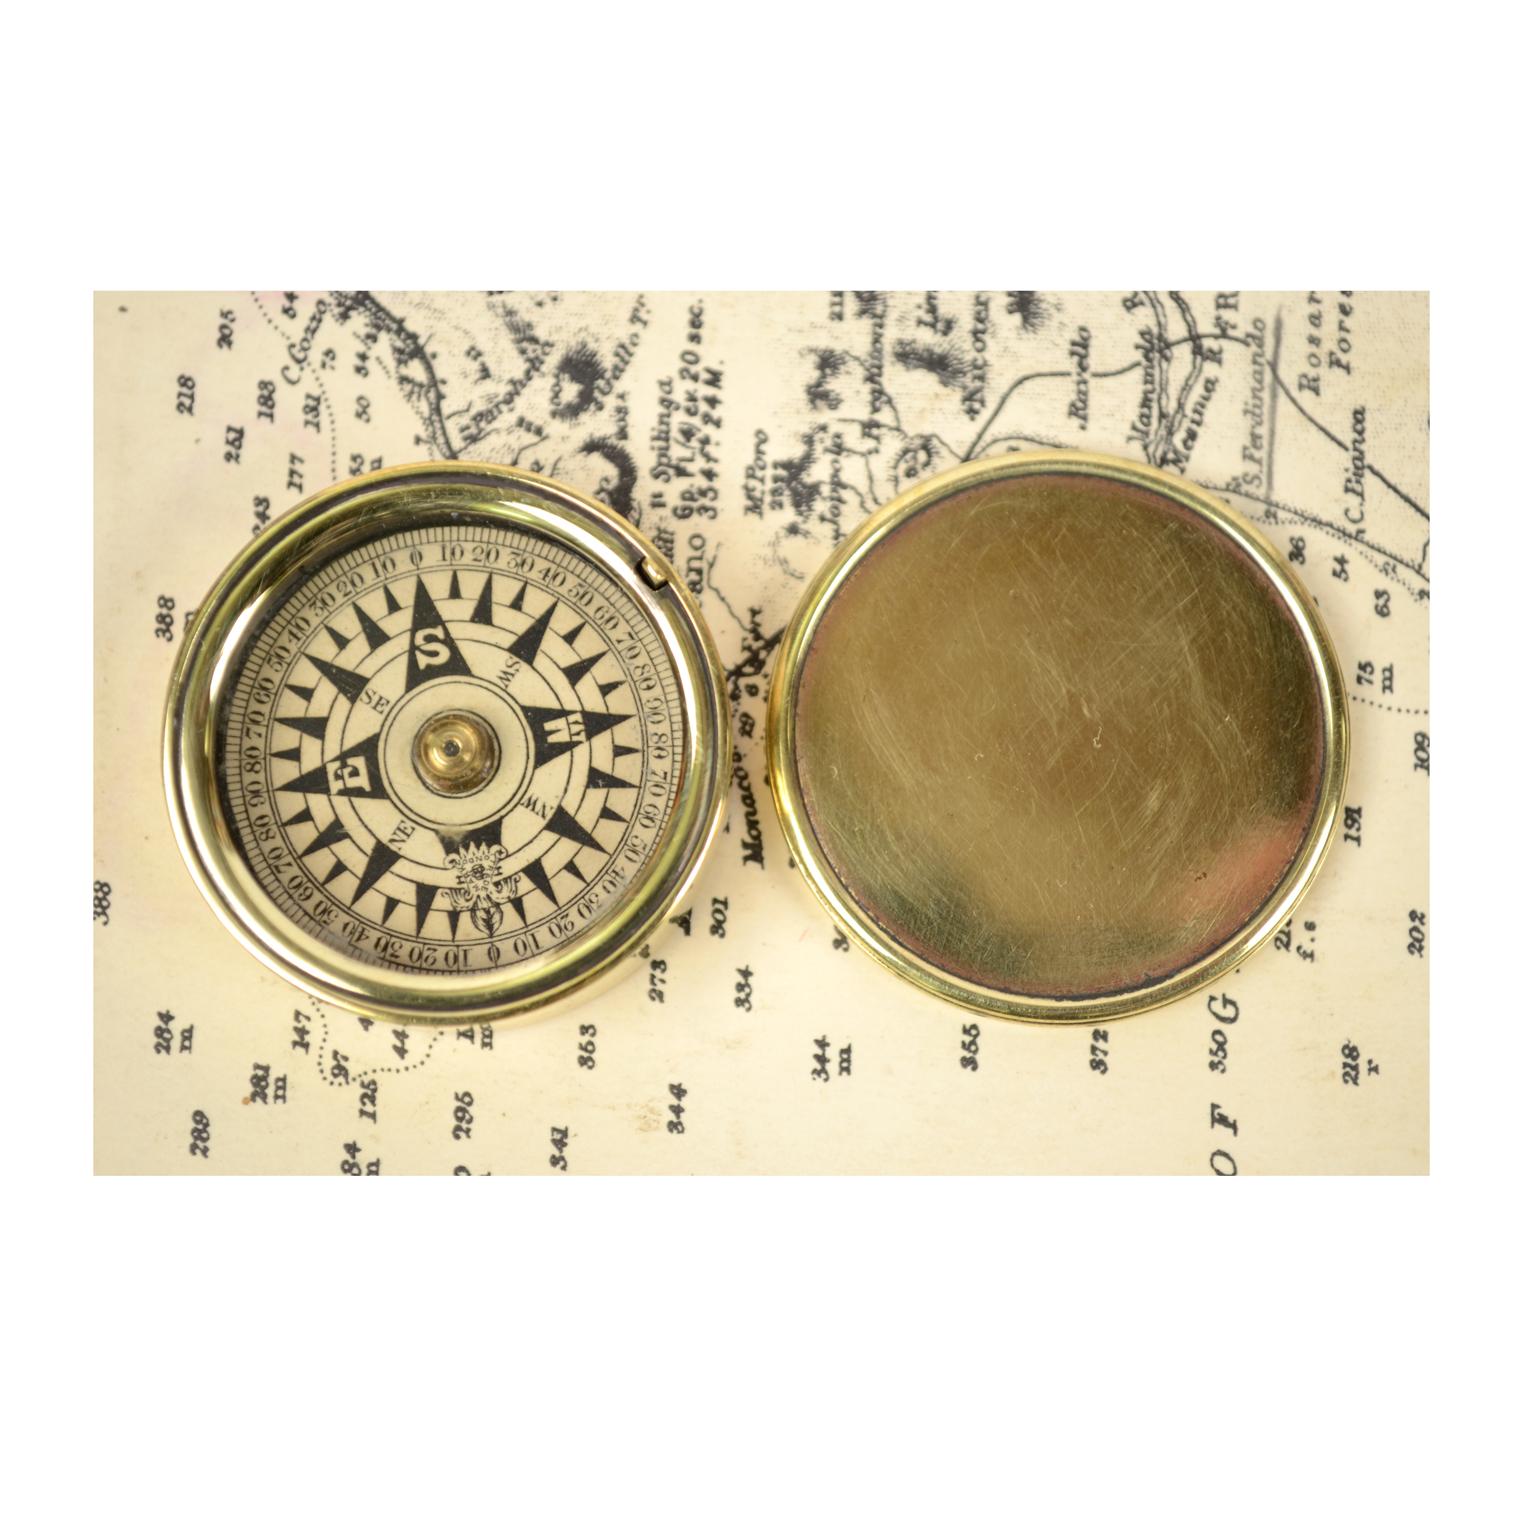 British Dry Pocket Nautical Compass Placed in Its Original Box Made of Turned Brass